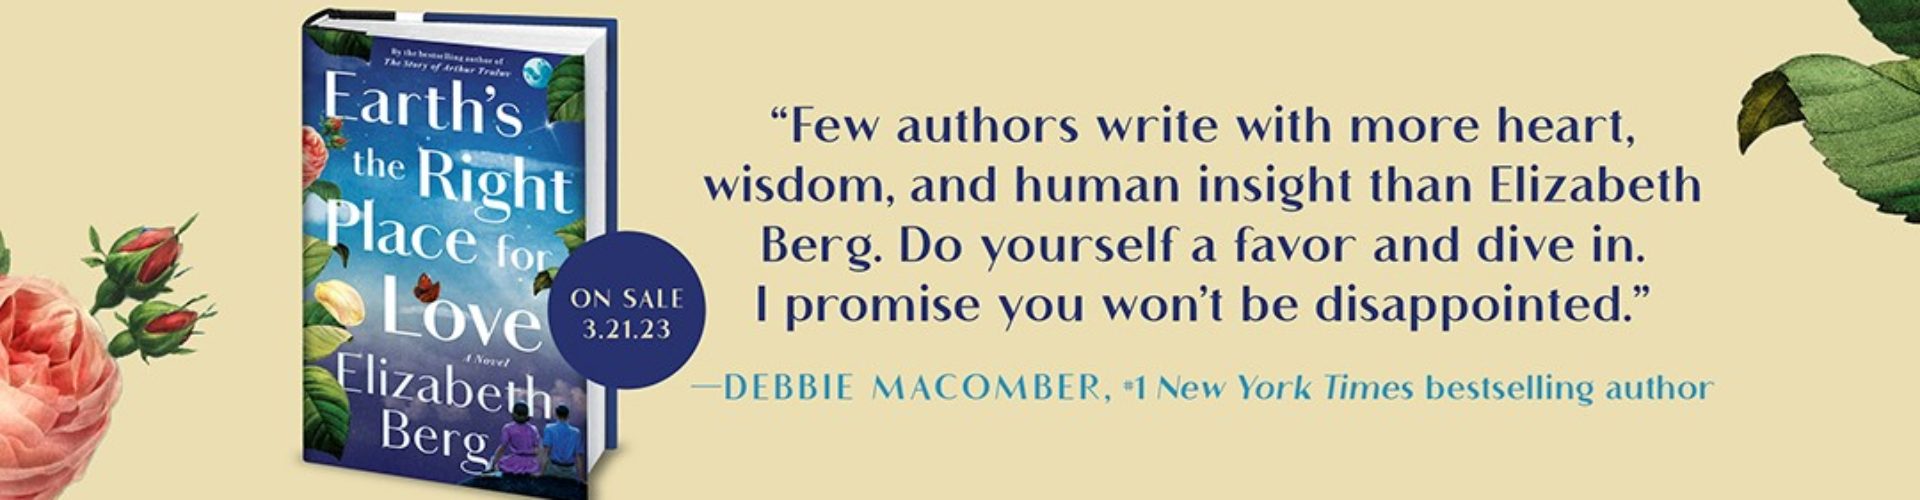 "Few authors write with more hearty, wisdom, and human insight than Elizabeth Berg. Do yourself a favor and dive in. I promise you won't be disappointed." quote from Debbie Macomber